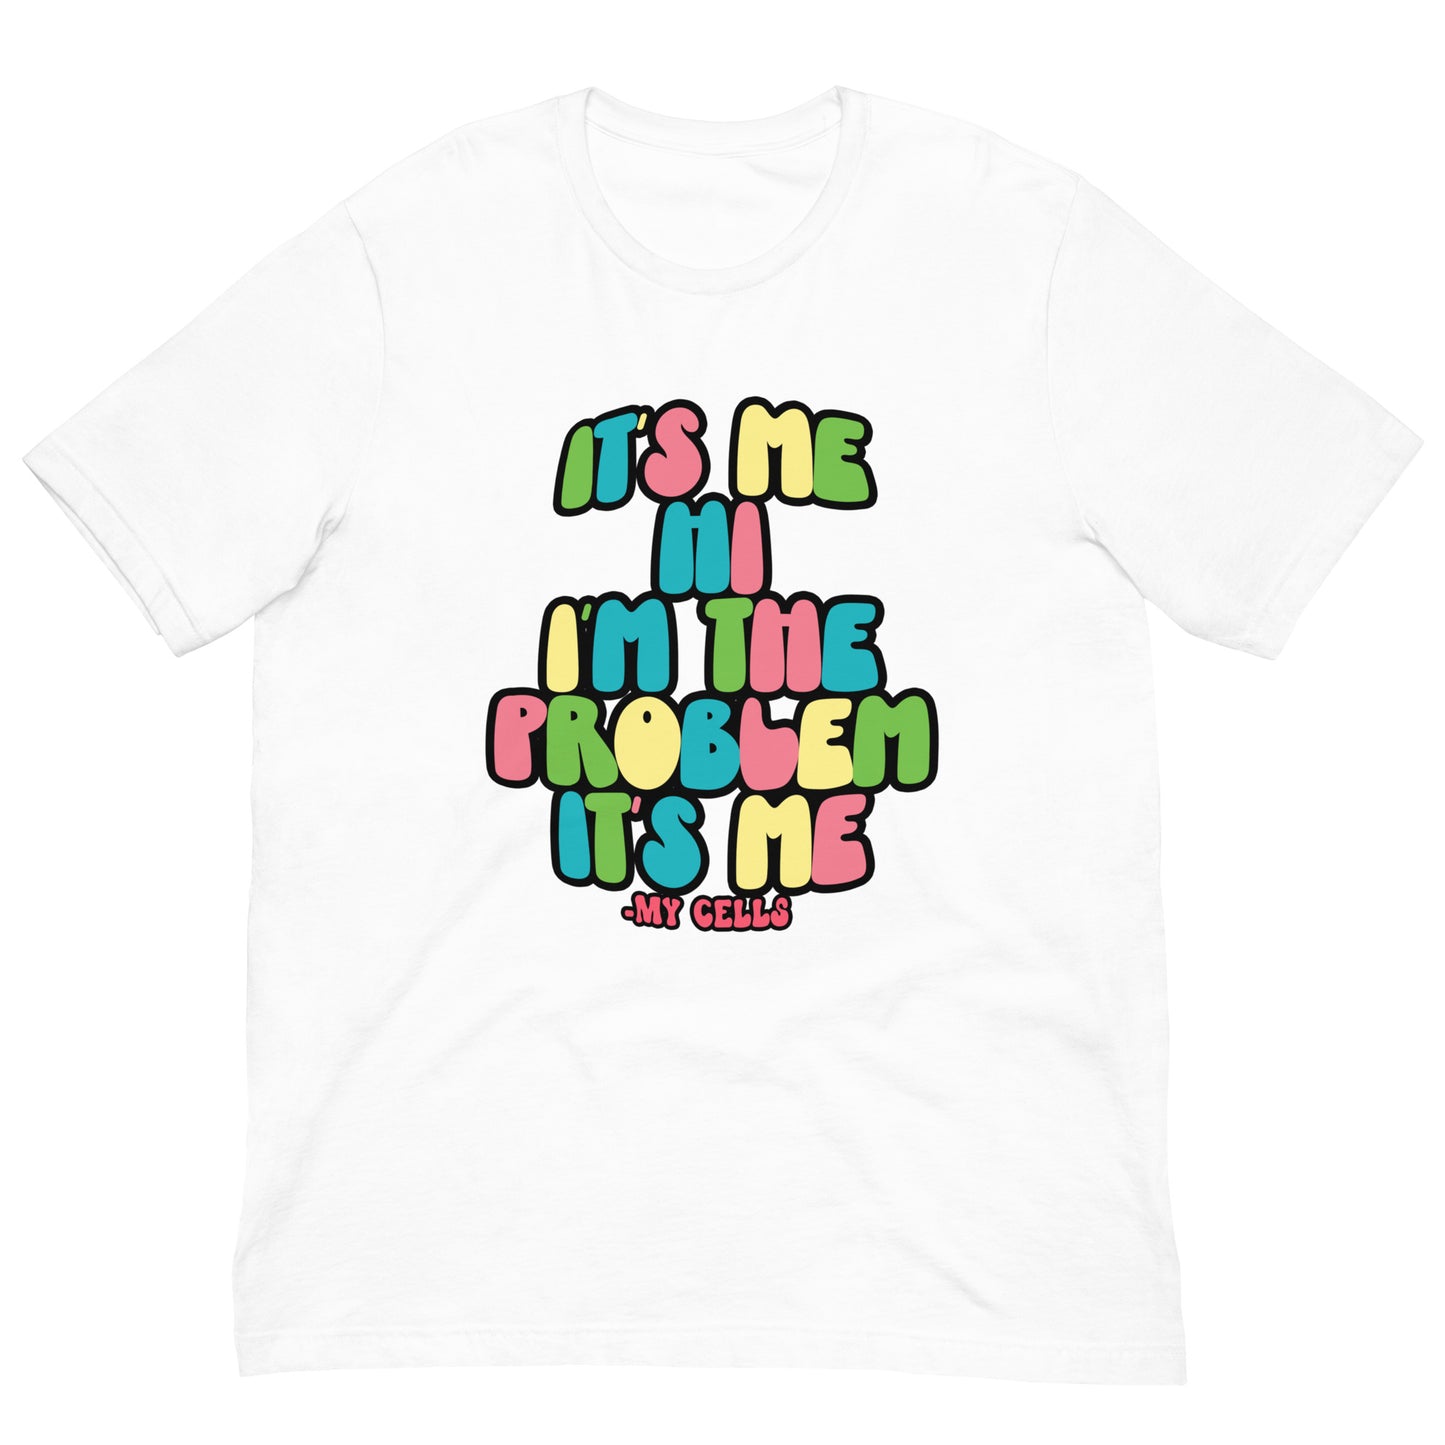 My Cells Are The Problem Tee